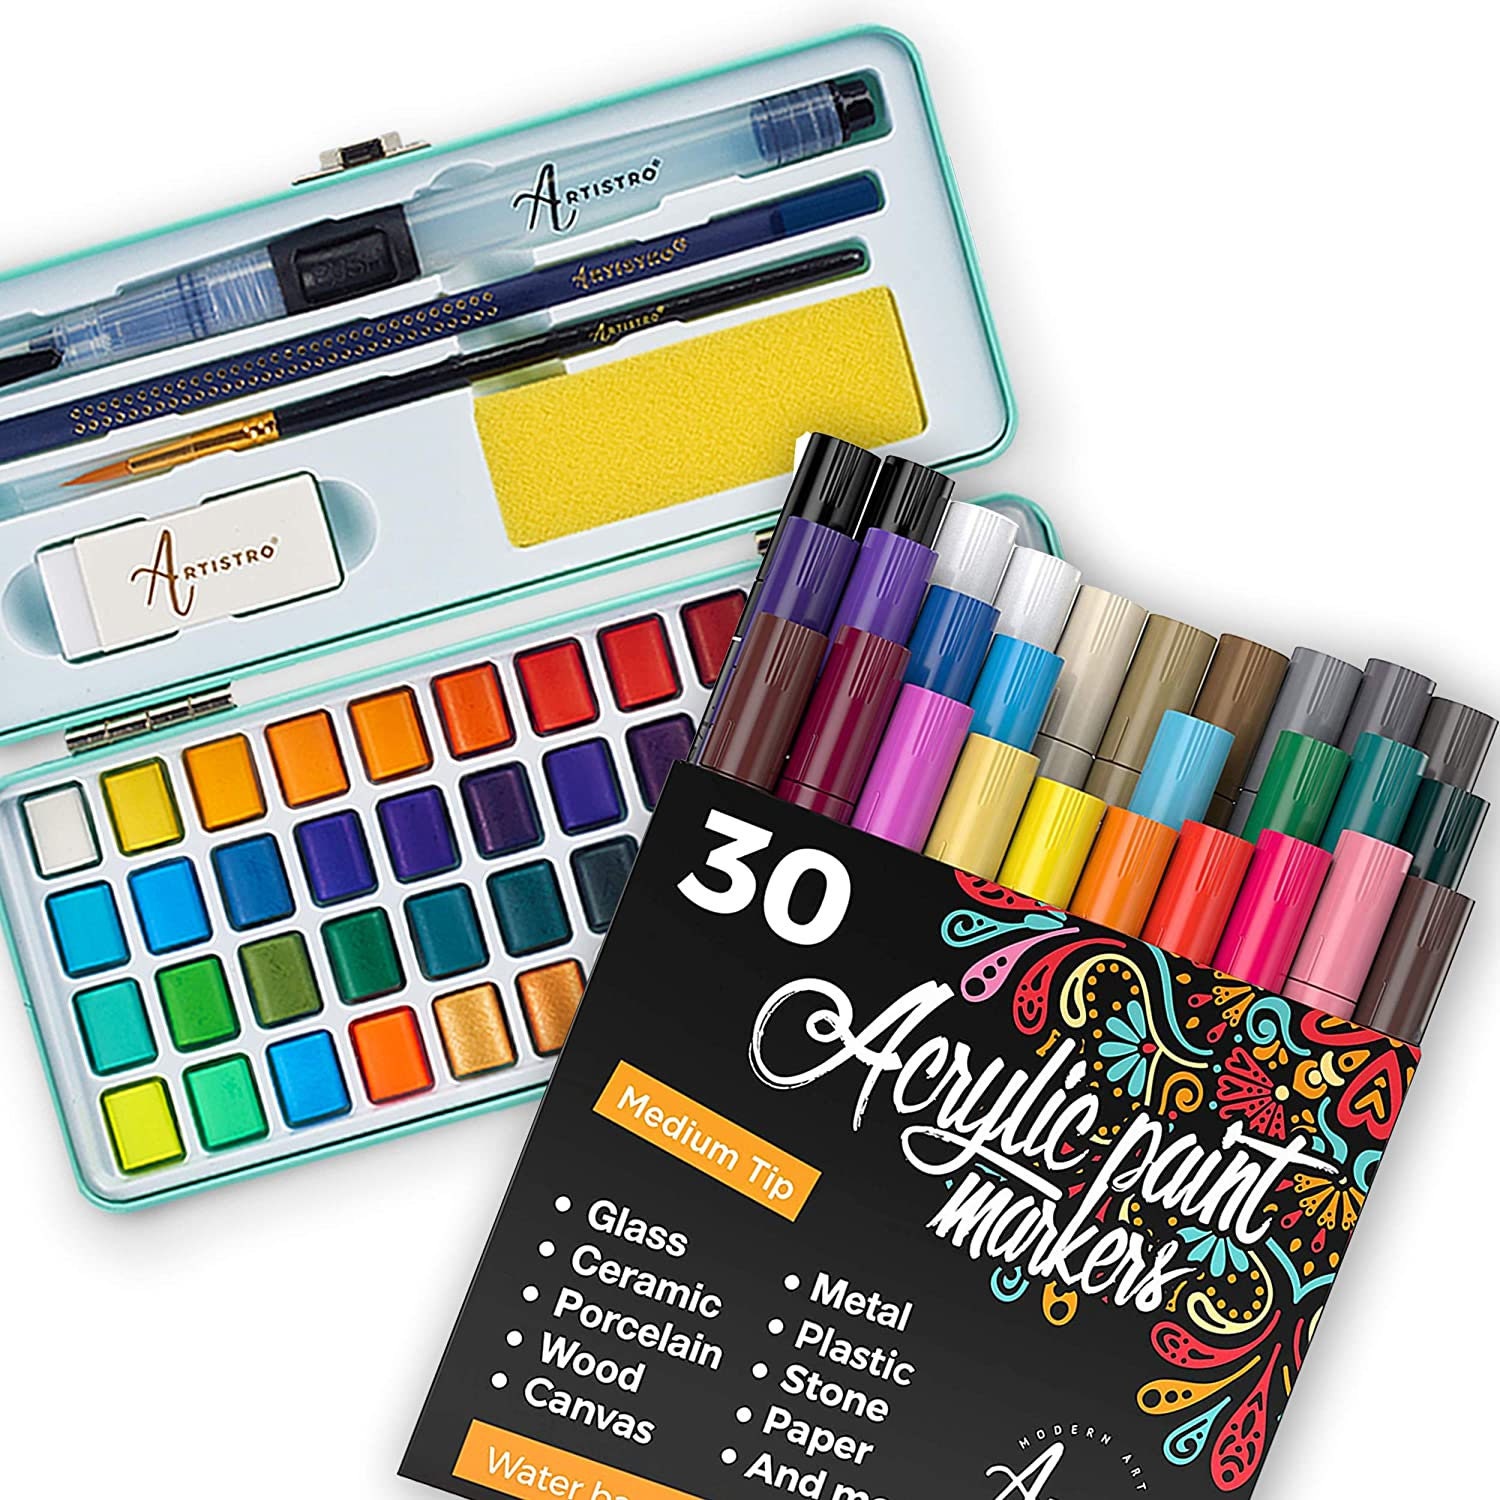 Artistro Cute 30 Acrylic Paint Pens Medium Tip for Rock Painting, Kids  Craft, Family Painting, Wood Art, Glass Art, Gift for Boys and Girls 